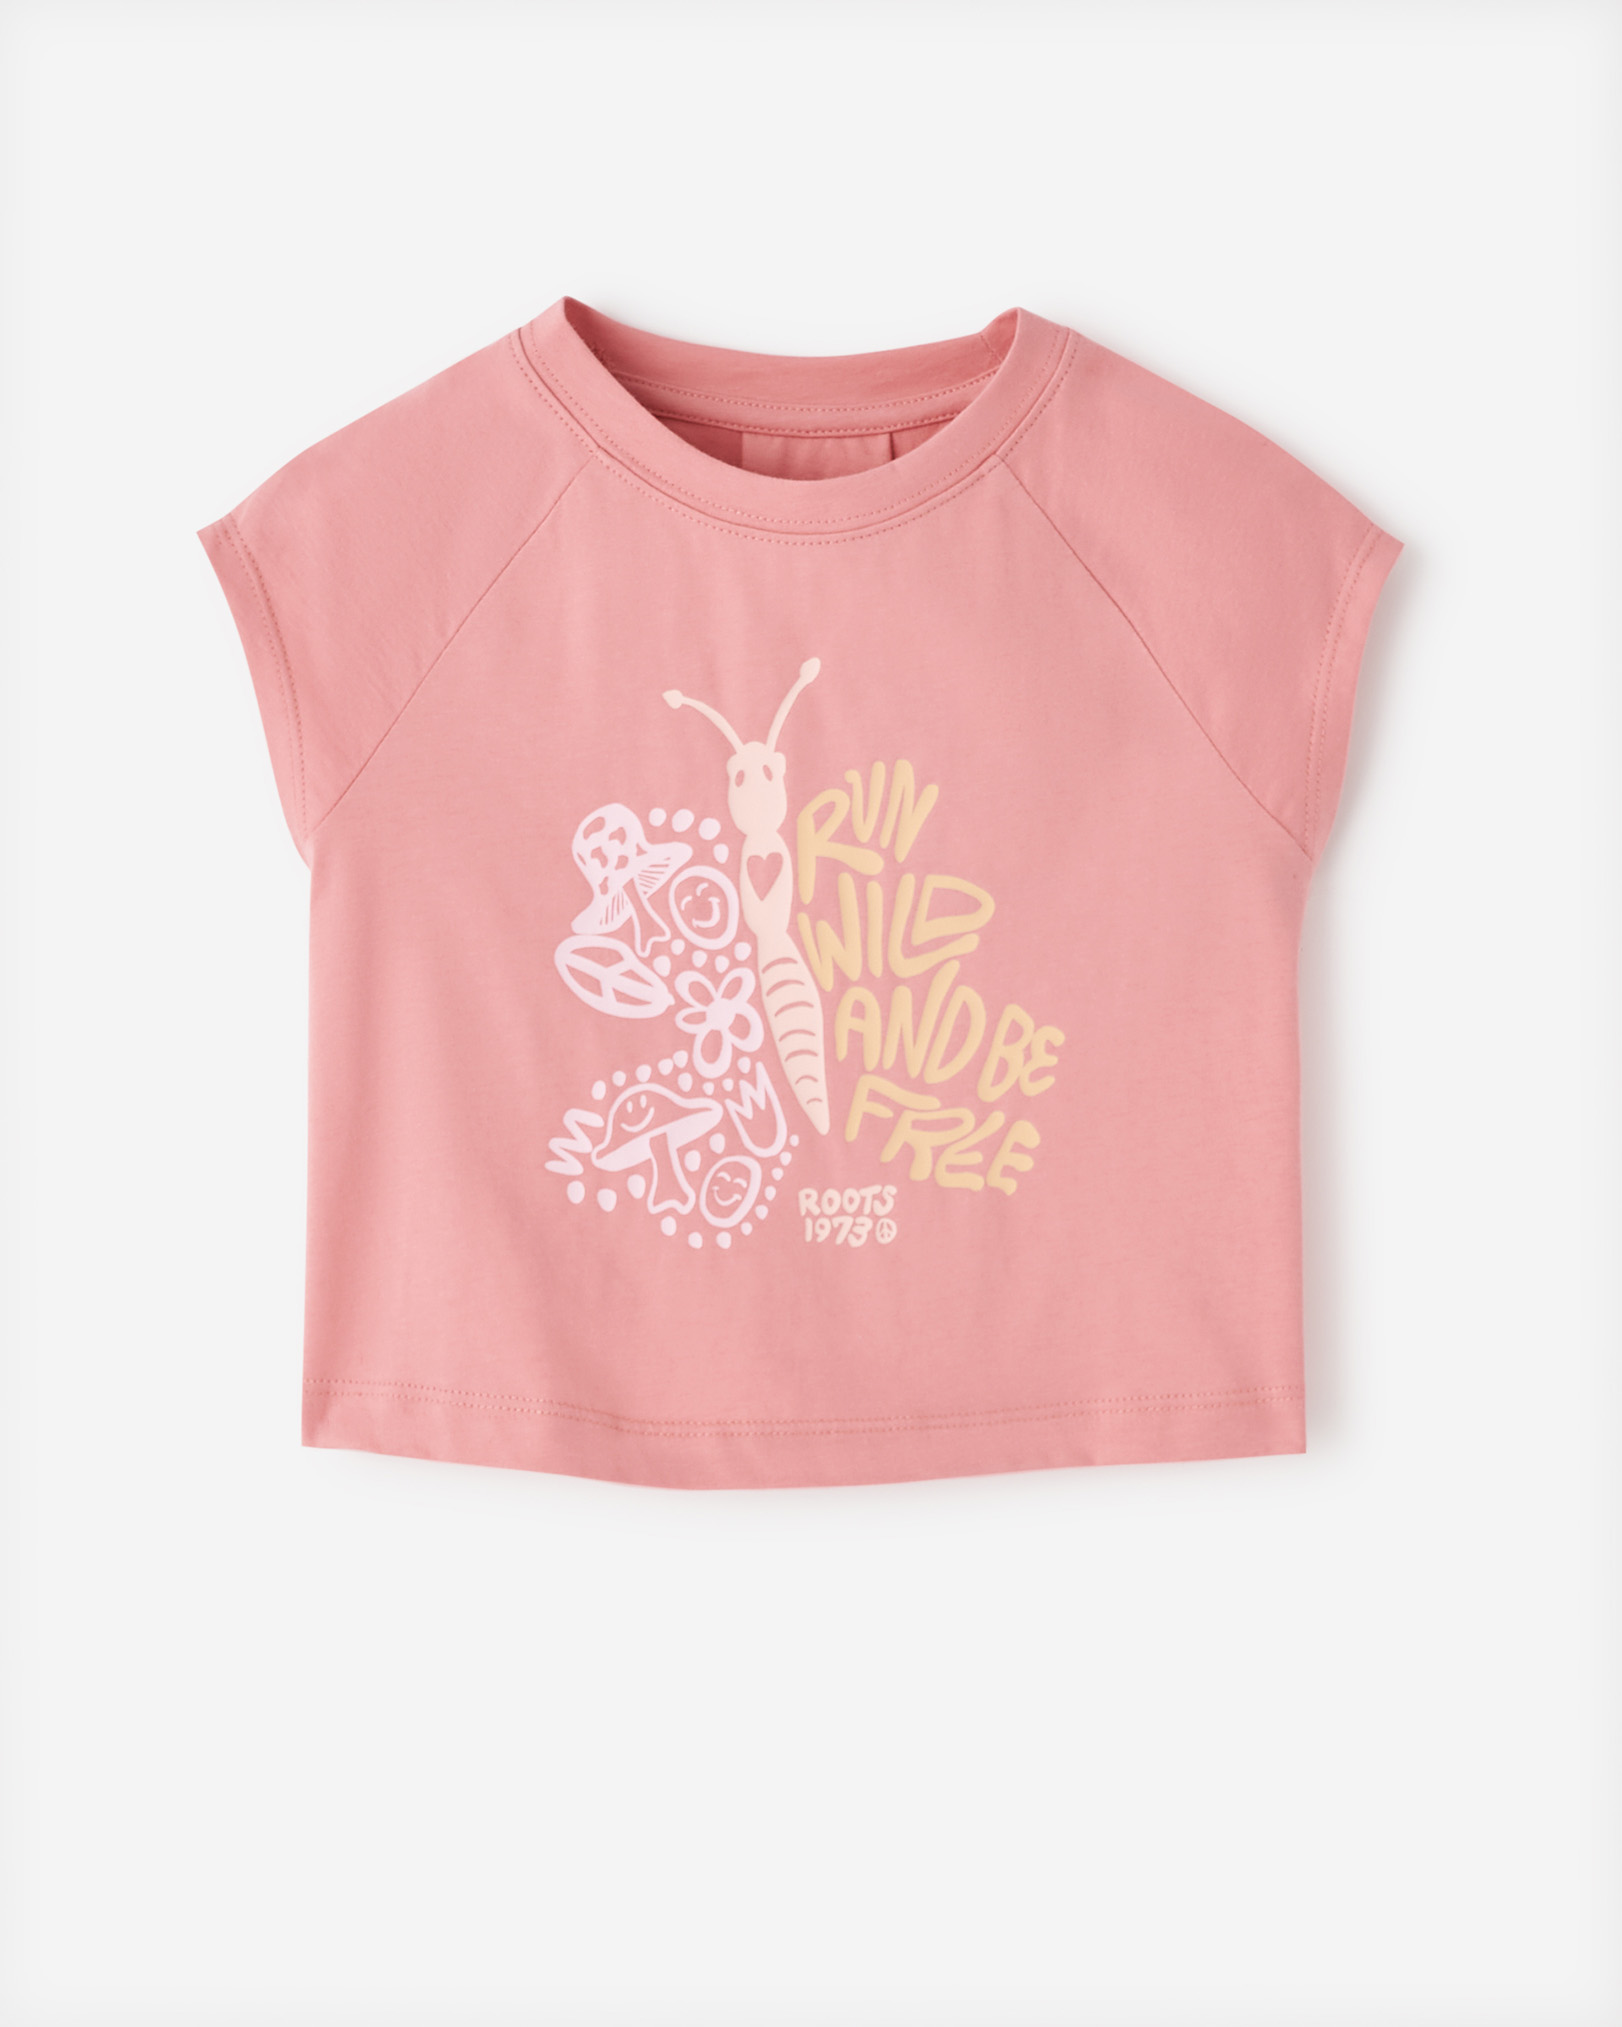 Roots Toddler Girl's Wild & Free T-Shirt in Mauveglow